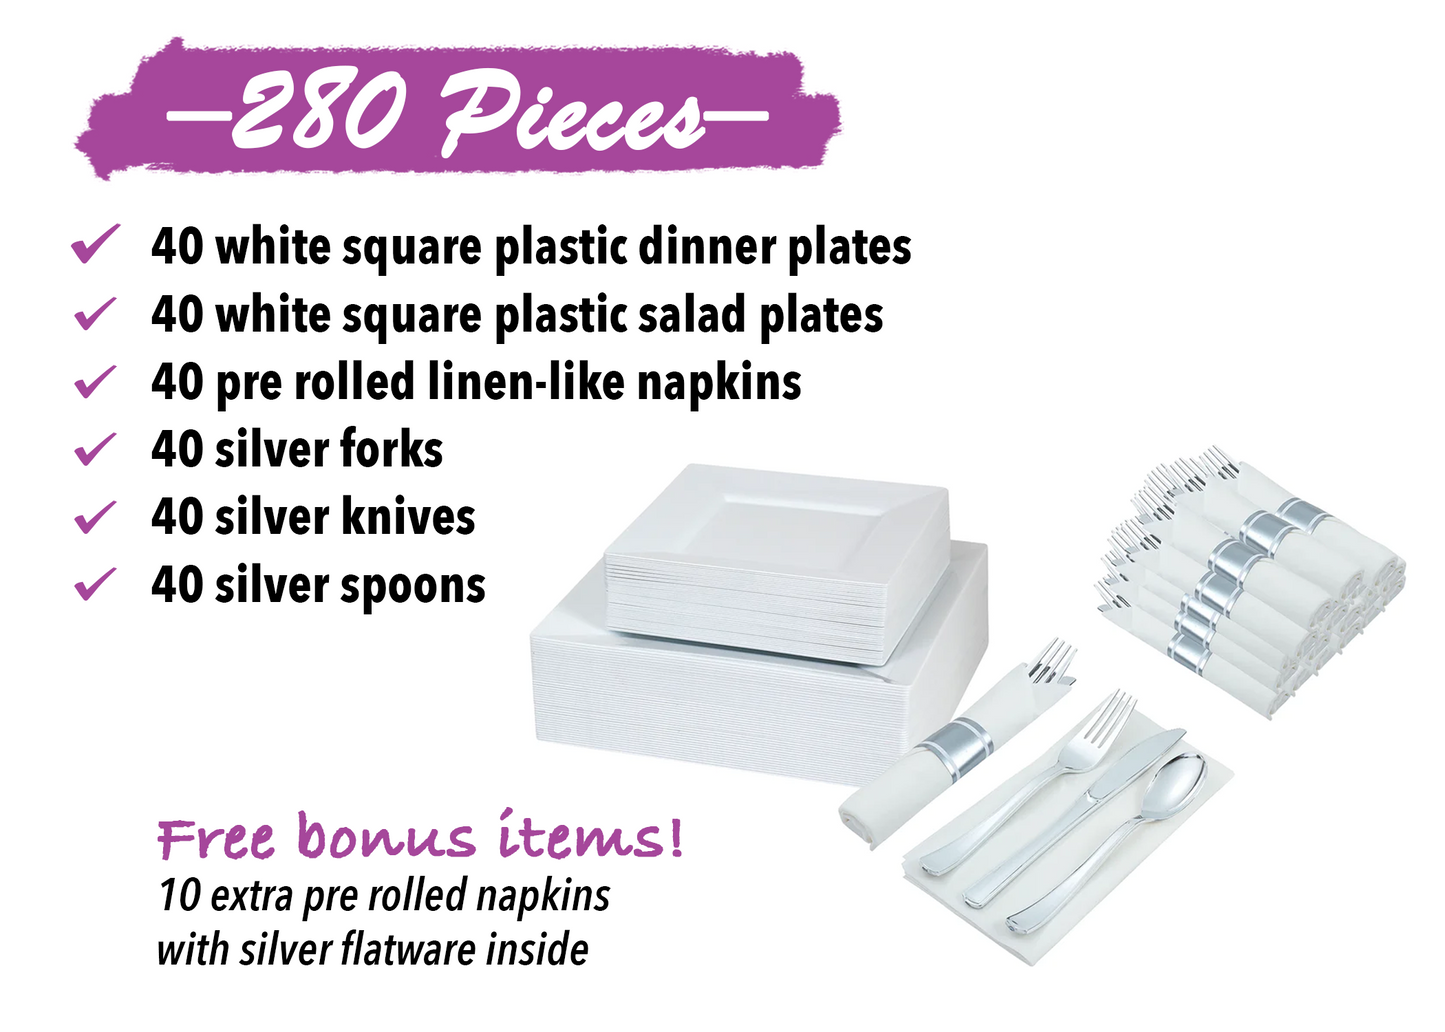 Disposable dinnerware set for 40 guests 280 pieces Includes: 40 white square plastic dinner plates, 40 salad plates, 50 pre-rolled linen feel napkins with silver spoons, forks & knives wrapped inside.